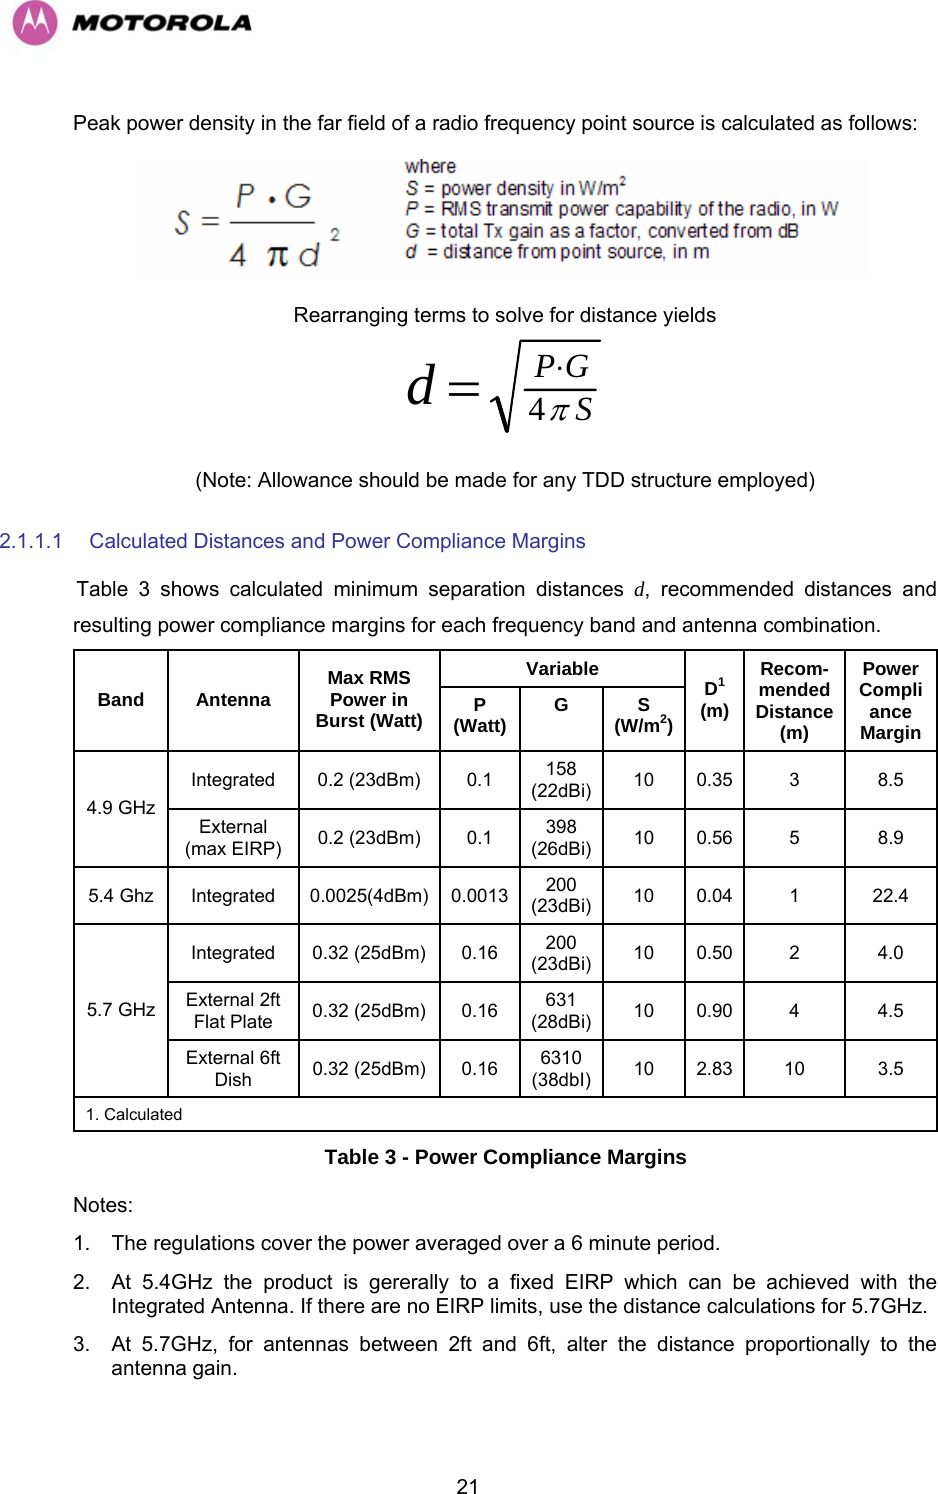   21Peak power density in the far field of a radio frequency point source is calculated as follows:  Rearranging terms to solve for distance yields SGPdπ4⋅= (Note: Allowance should be made for any TDD structure employed) 2.1.1.1  Calculated Distances and Power Compliance Margins HTable 3 shows calculated minimum separation distances d, recommended distances and resulting power compliance margins for each frequency band and antenna combination. Variable Band Antenna  Max RMS Power in Burst (Watt)  P (Watt)  G S (W/m2) D1 (m) Recom- mended Distance (m) PowerCompliance Margin Integrated 0.2 (23dBm)  0.1  158 (22dBi) 10 0.35  3  8.5 4.9 GHz External (max EIRP)  0.2 (23dBm)  0.1  398 (26dBi) 10 0.56  5  8.9 5.4 Ghz  Integrated  0.0025(4dBm) 0.0013 200 (23dBi) 10 0.04  1  22.4 Integrated 0.32 (25dBm) 0.16  200 (23dBi) 10 0.50  2  4.0 External 2ft Flat Plate  0.32 (25dBm)  0.16  631 (28dBi) 10 0.90  4  4.5 5.7 GHz External 6ft Dish  0.32 (25dBm)  0.16  6310 (38dbI)  10 2.83  10  3.5 1. Calculated Table 3 - Power Compliance Margins Notes: 1.  The regulations cover the power averaged over a 6 minute period. 2.  At 5.4GHz the product is gererally to a fixed EIRP which can be achieved with the Integrated Antenna. If there are no EIRP limits, use the distance calculations for 5.7GHz. 3.  At 5.7GHz, for antennas between 2ft and 6ft, alter the distance proportionally to the antenna gain. 